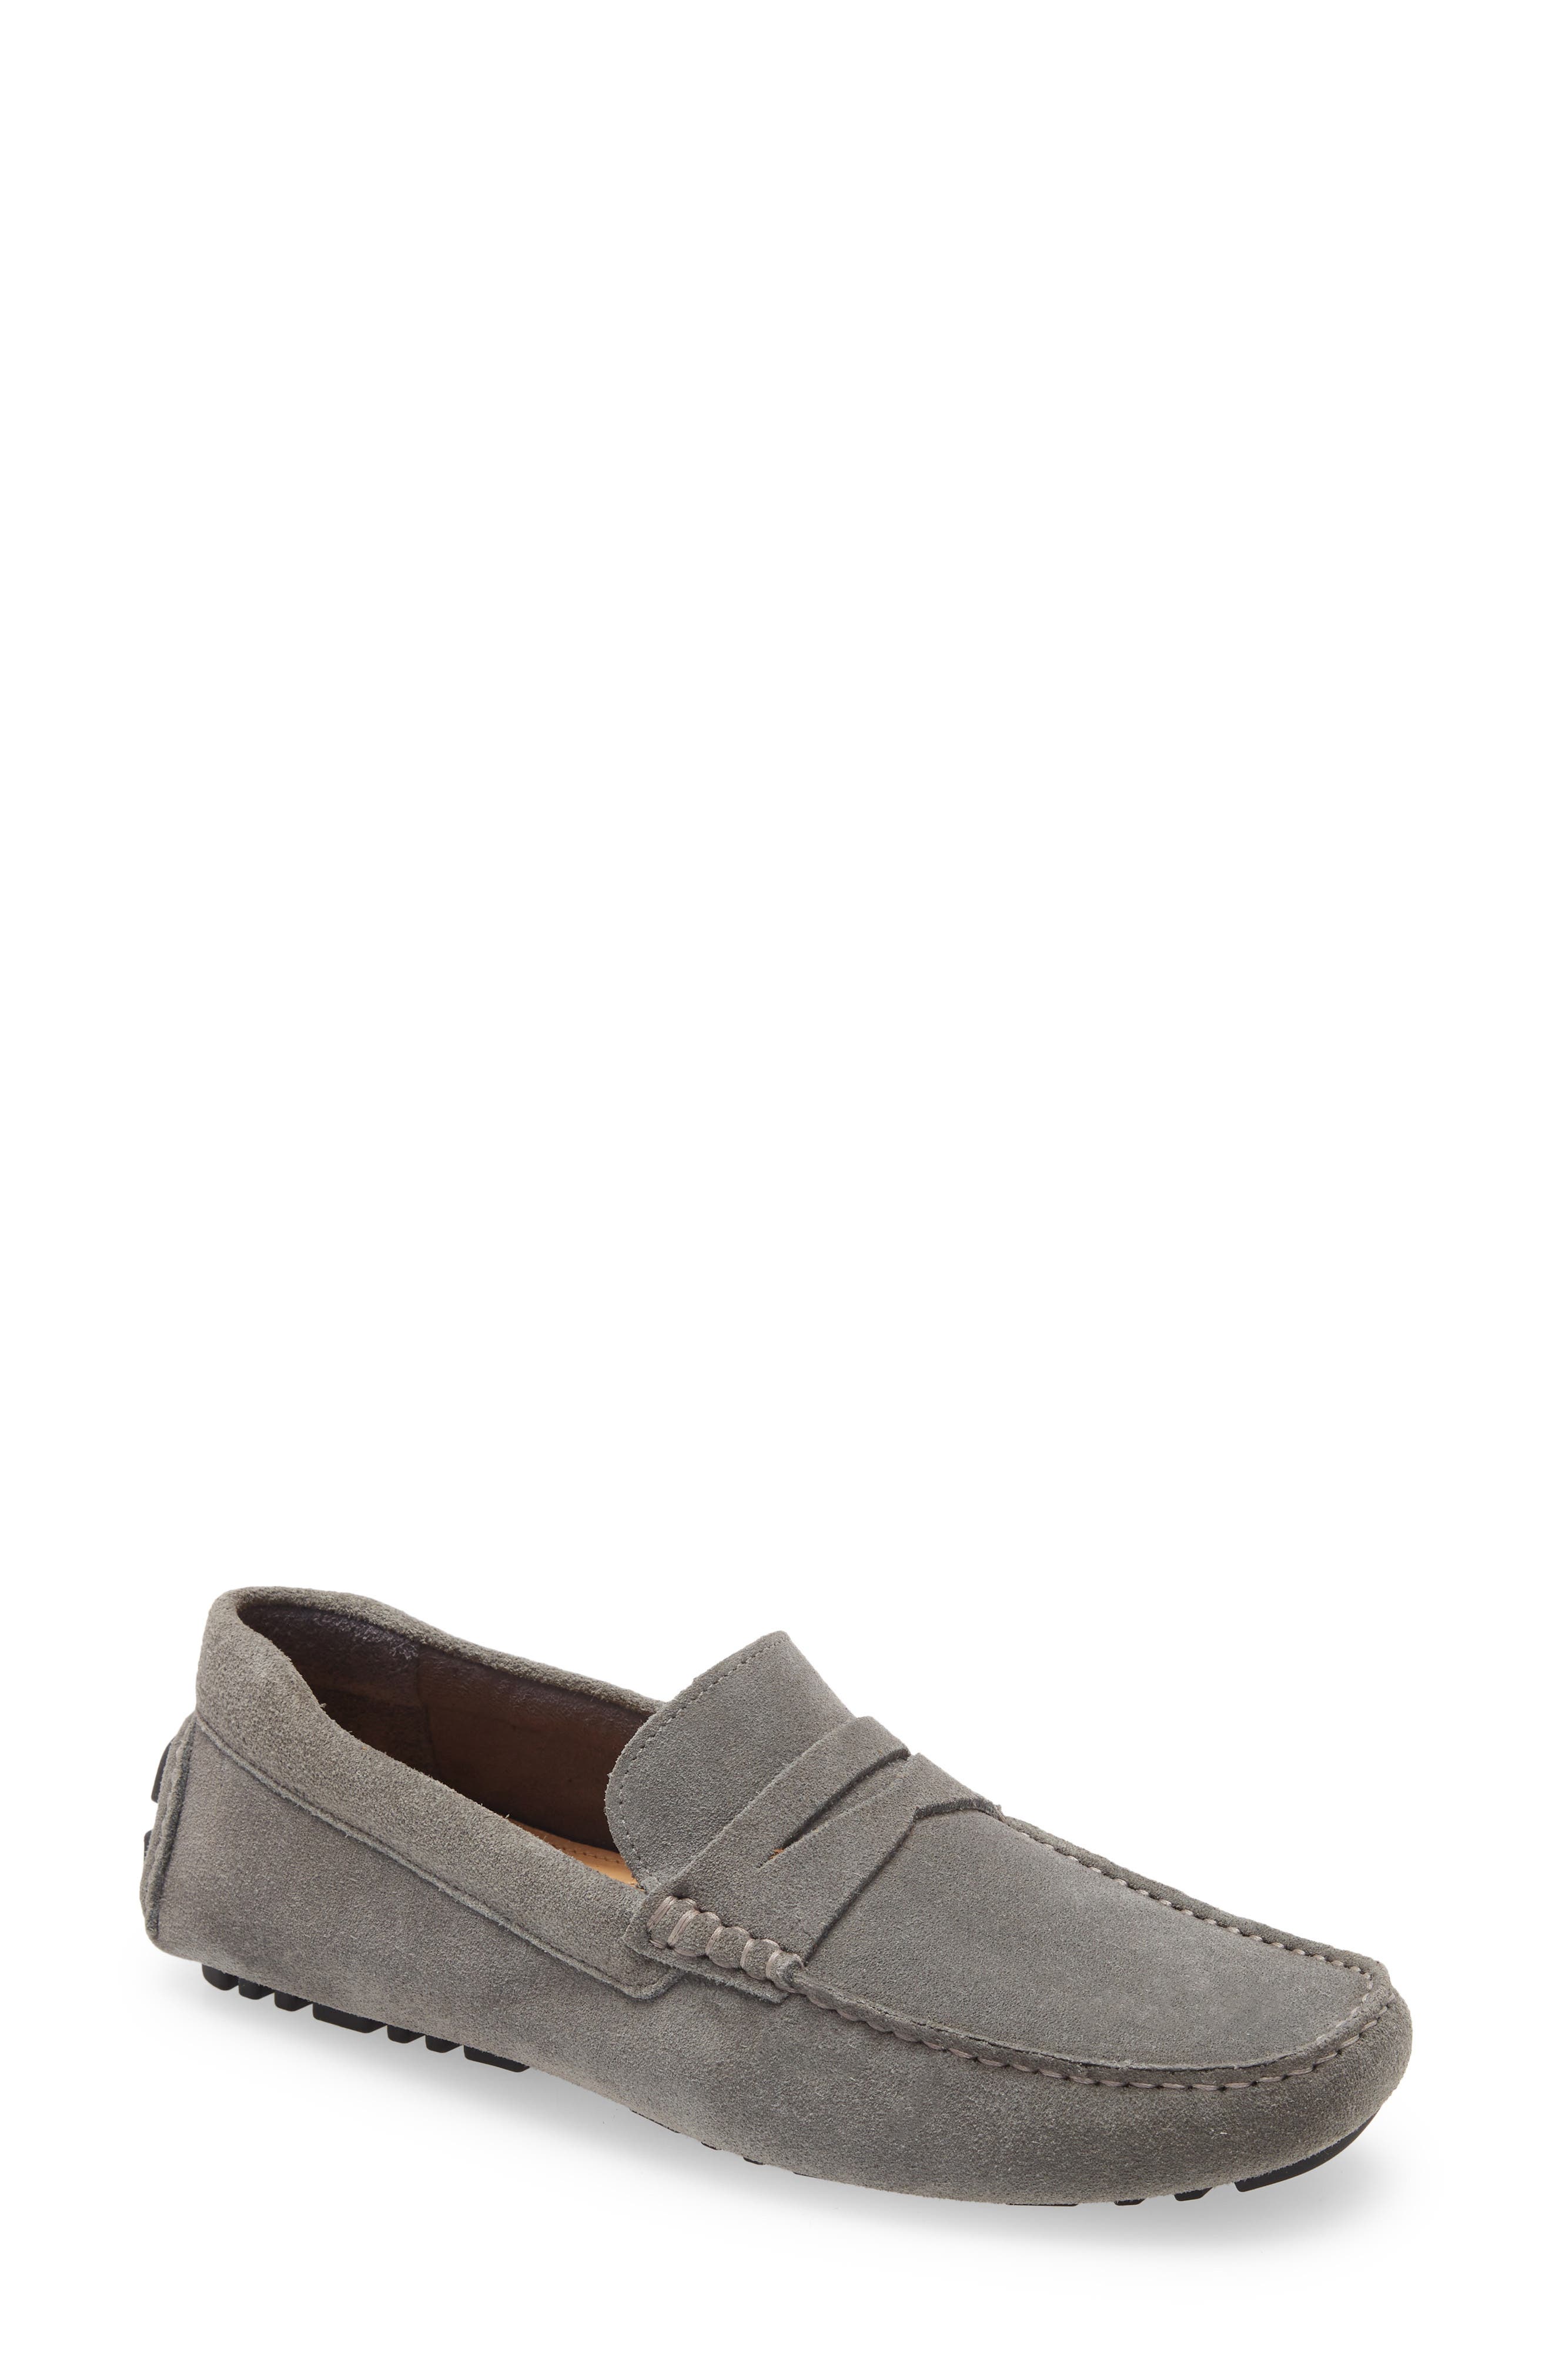 Grey Clarks Suede Landry Edge Loafers in Grey for Men Mens Shoes Slip-on shoes Loafers Save 35% 